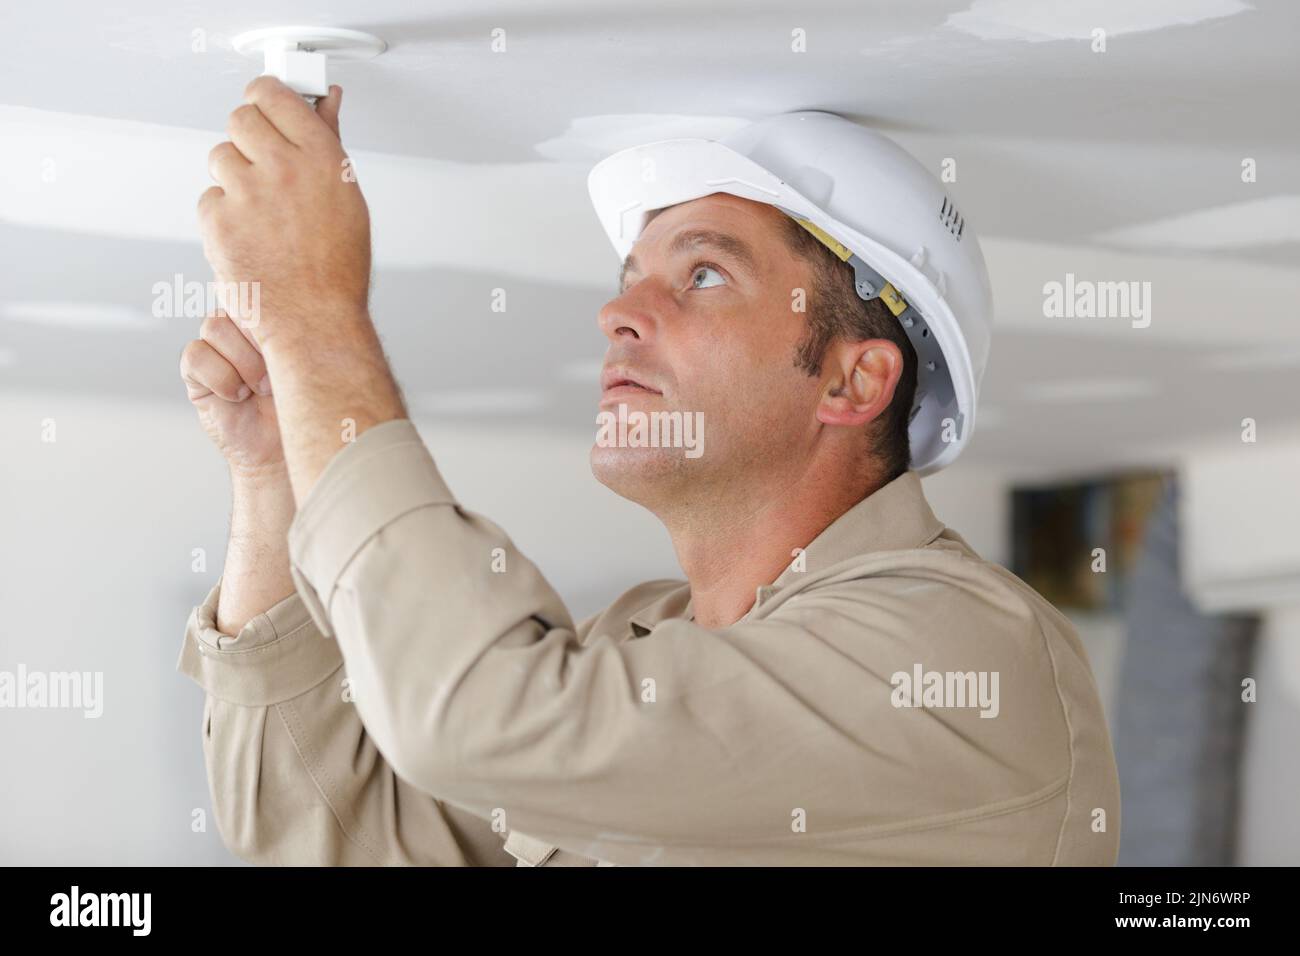 electrician working on ceiling light fitting Stock Photo